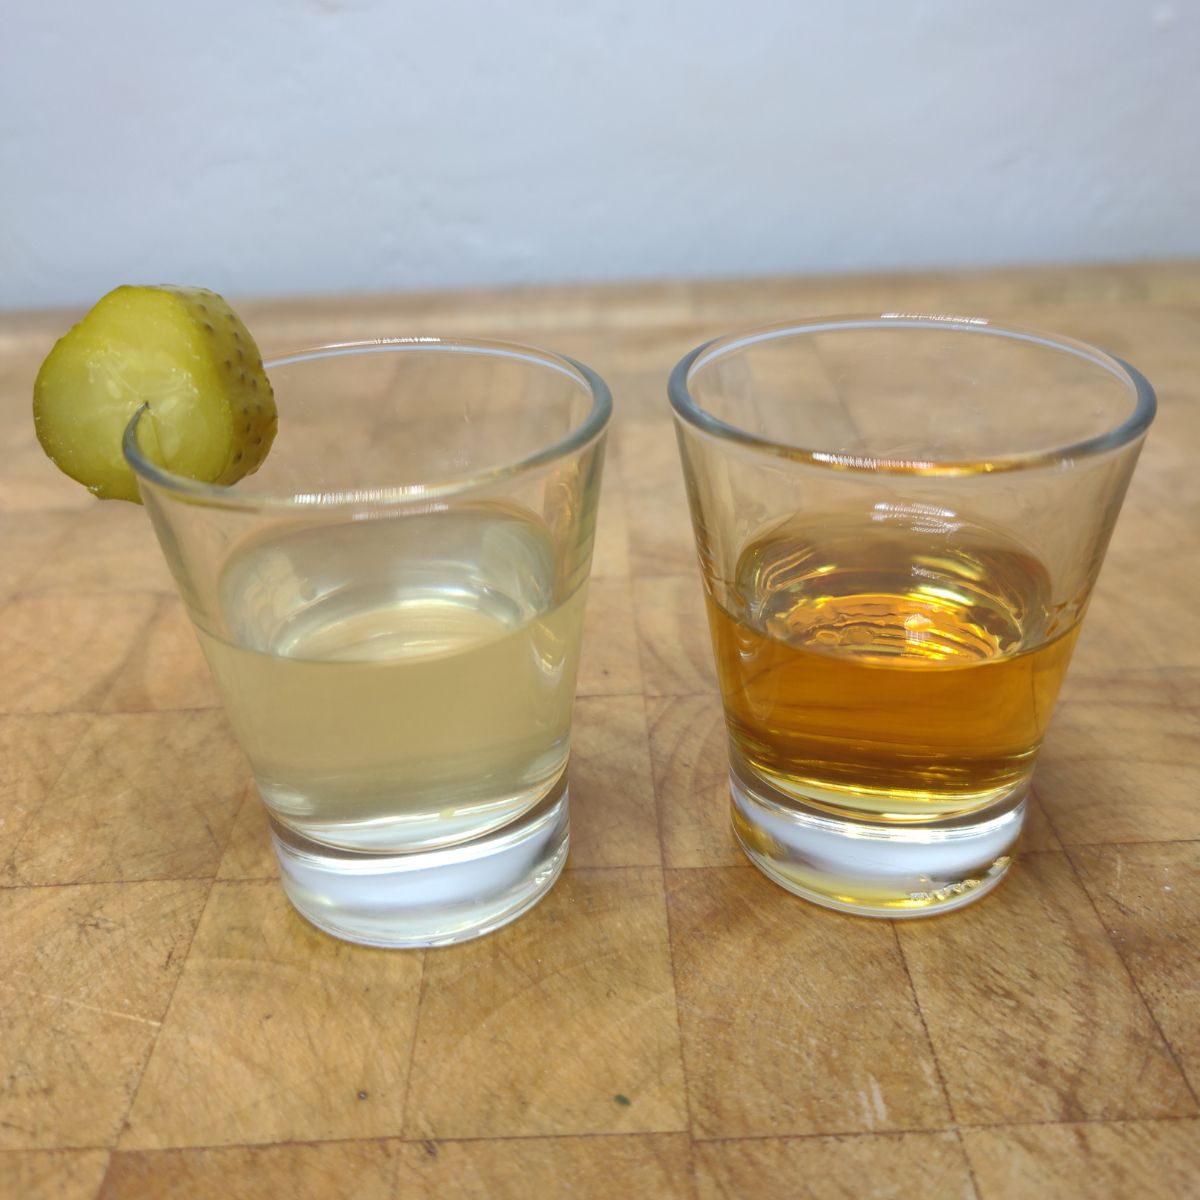 Pickleback shot with a pickle on the rim on a wooden table.